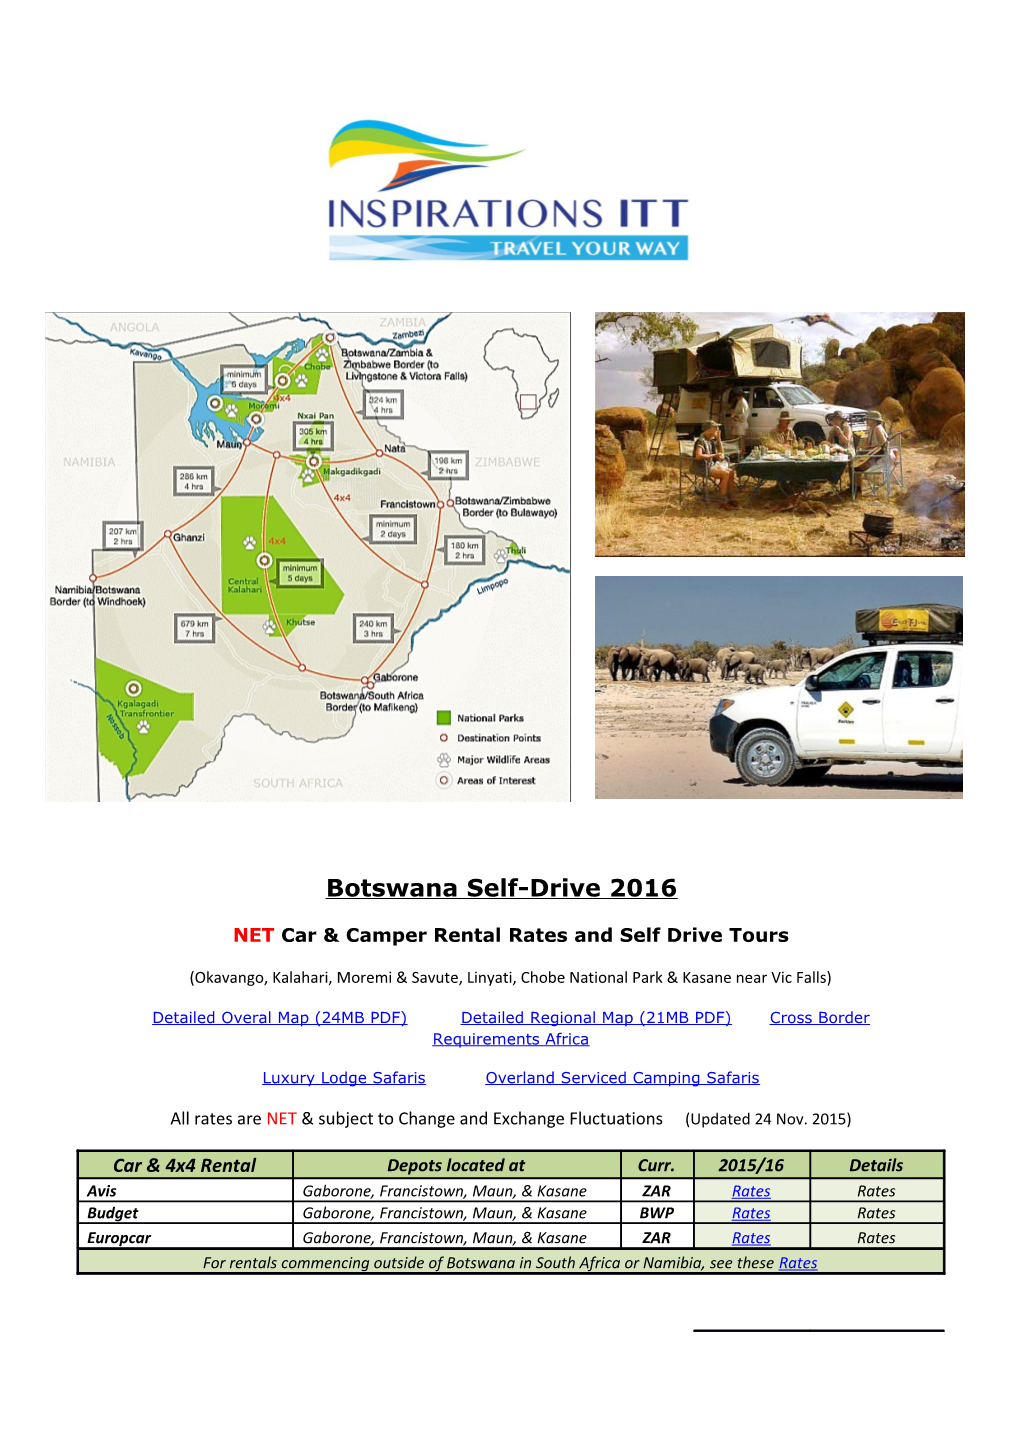 NET Car & Camper Rental Rates and Self Drive Tours